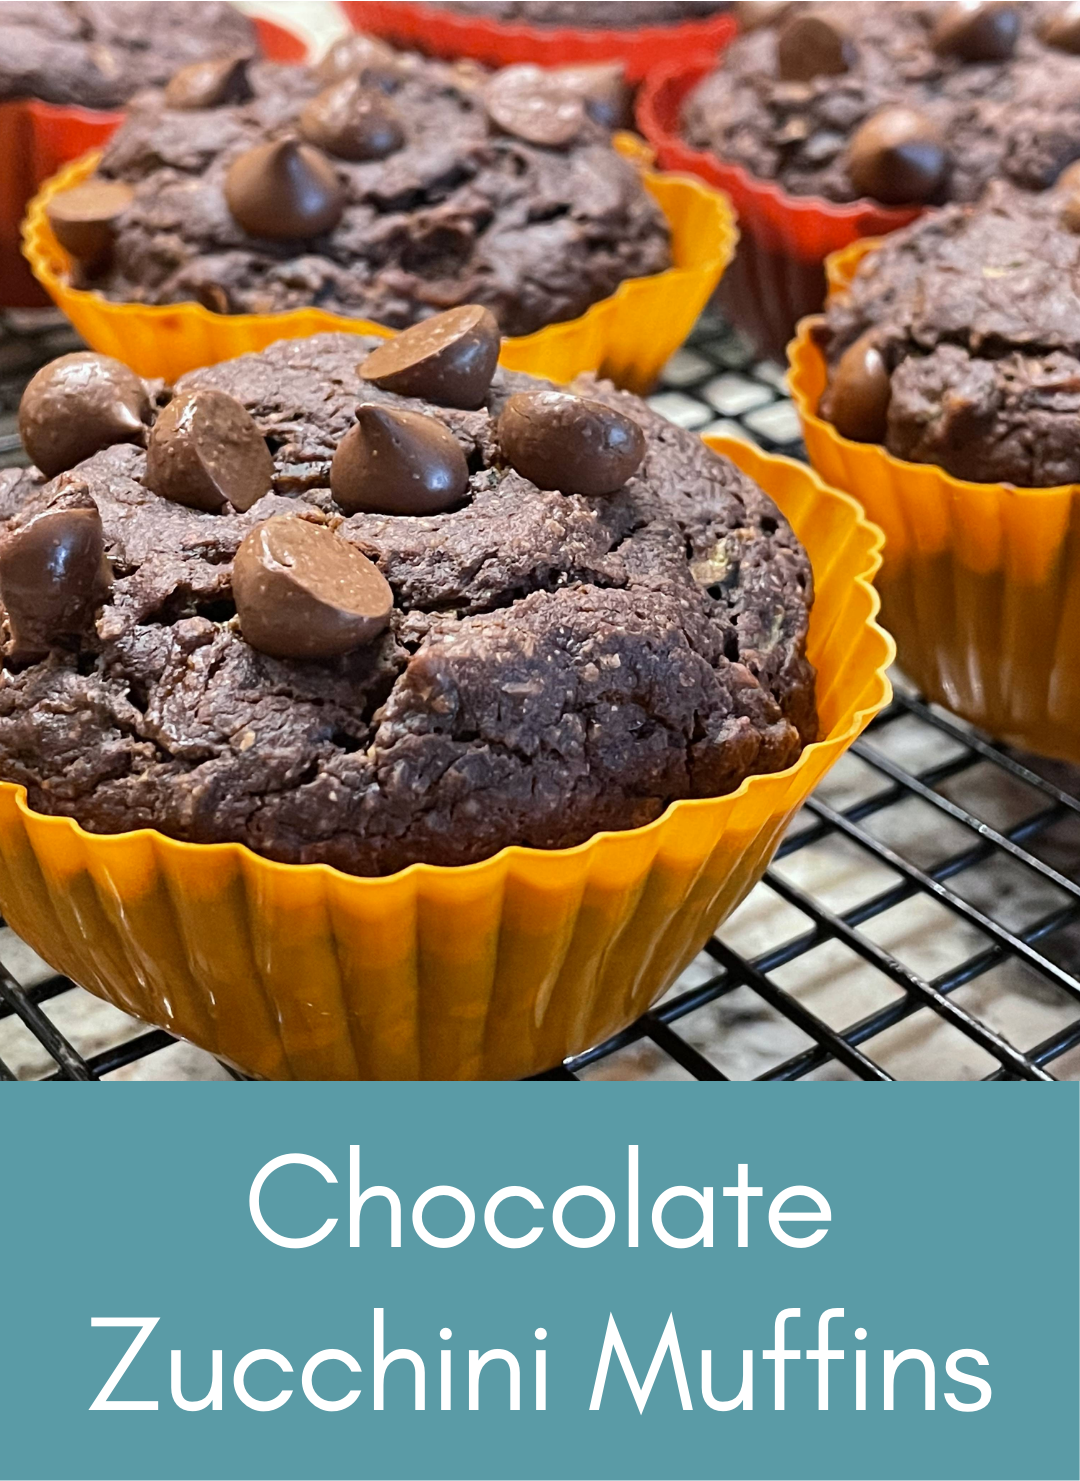 Whole food plant based vegan chocolate zucchini muffins Picture with link to recipe